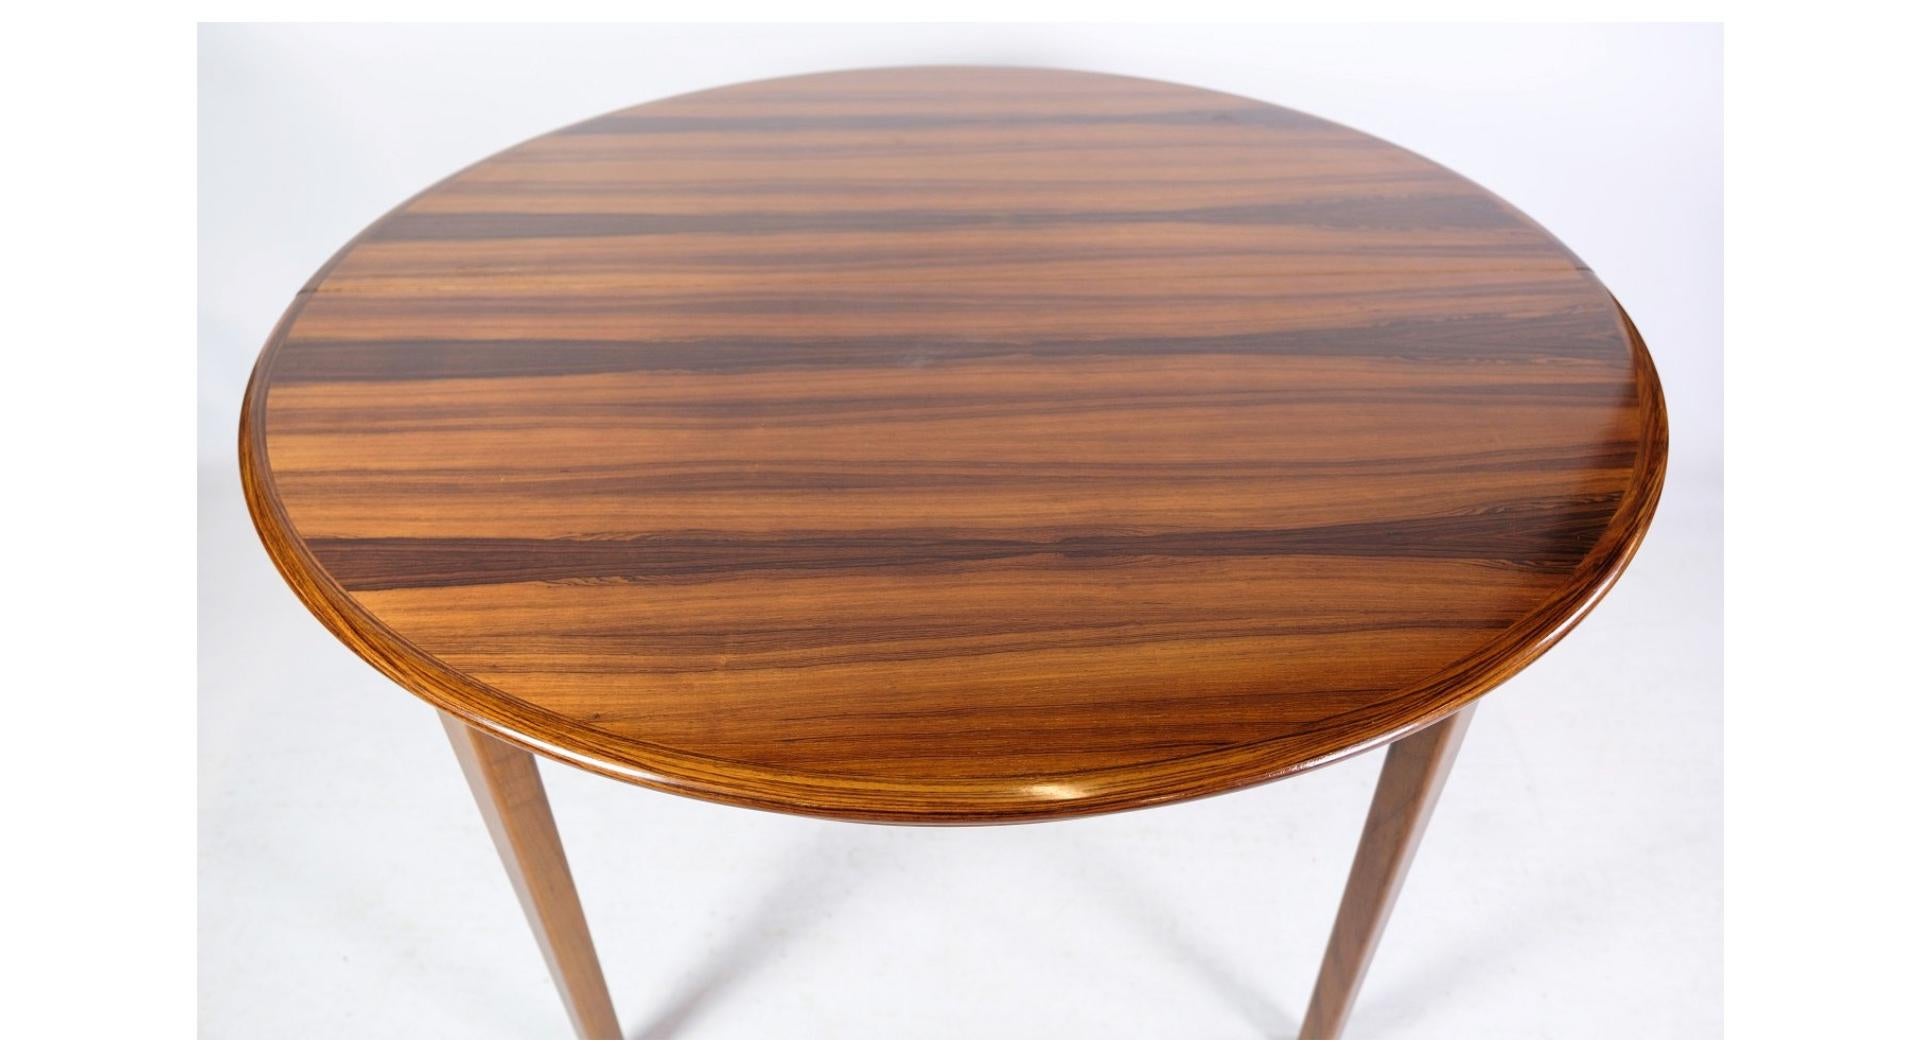 The rosewood dining table, designed by Johannes Andersen and manufactured at Uldum Møbelfabrik in the 1960s, is a remarkable example of mid-century Danish furniture design. Renowned for its exquisite craftsmanship and timeless elegance, this table